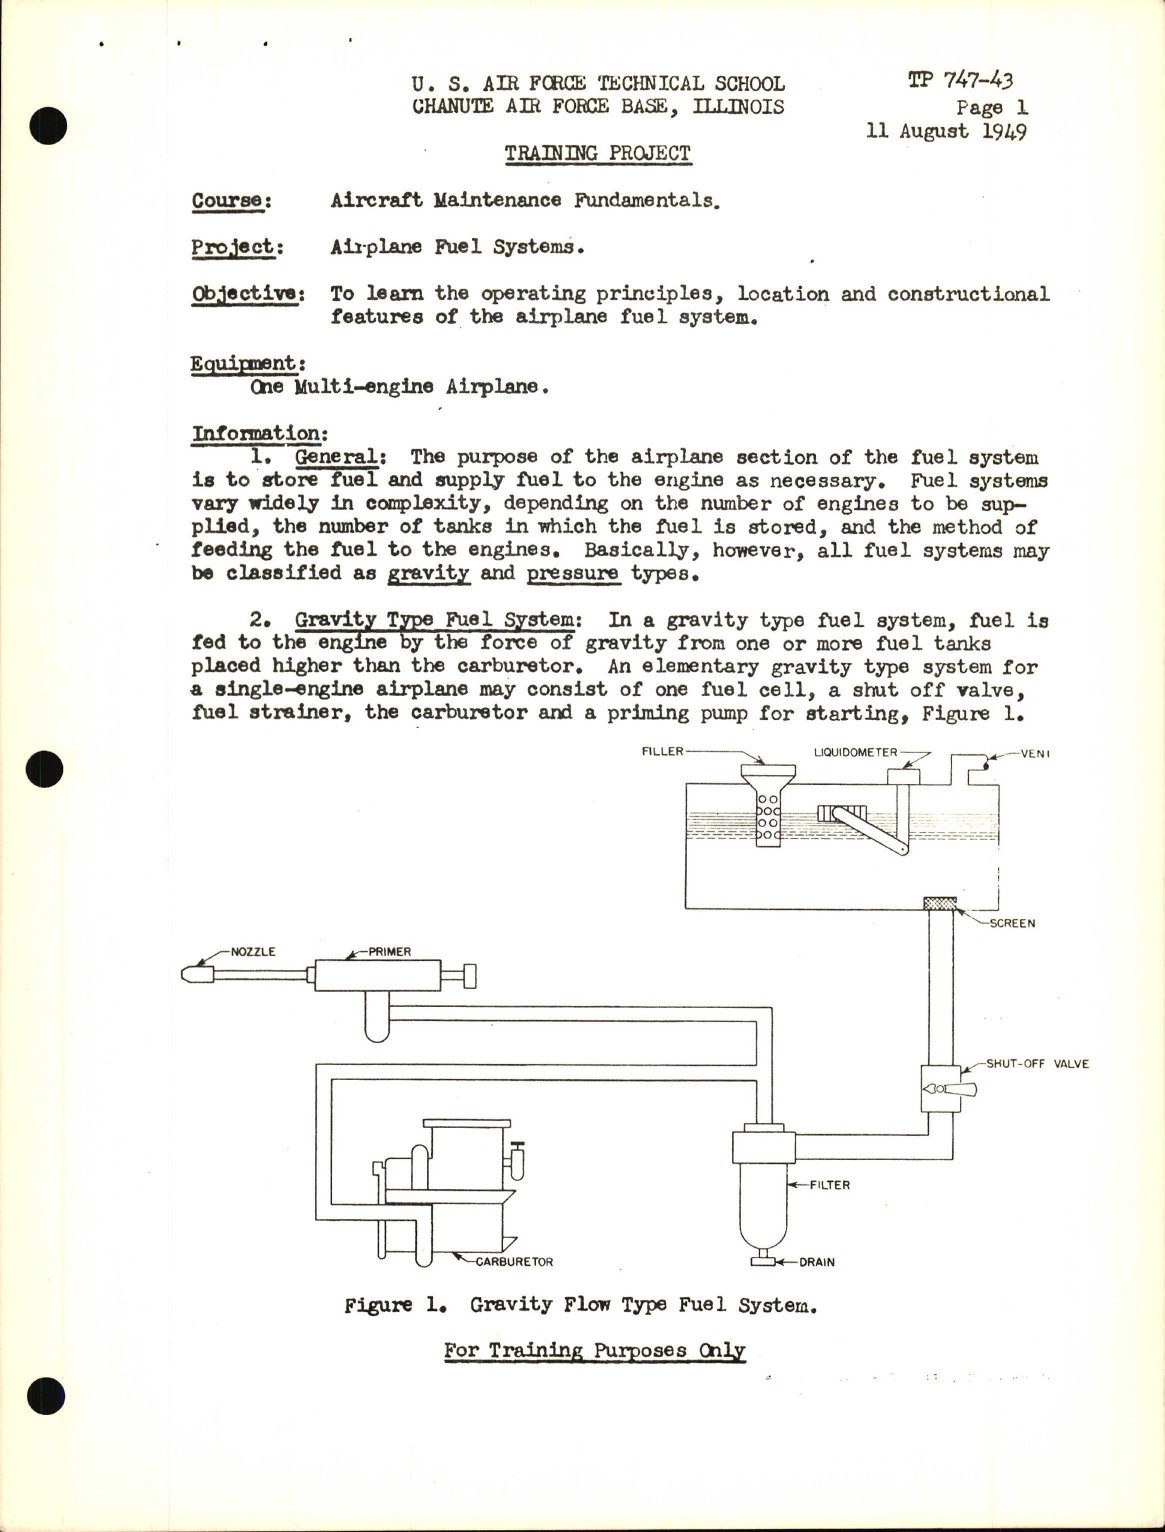 Sample page 1 from AirCorps Library document: Training Project, Airplane Fuel Systems